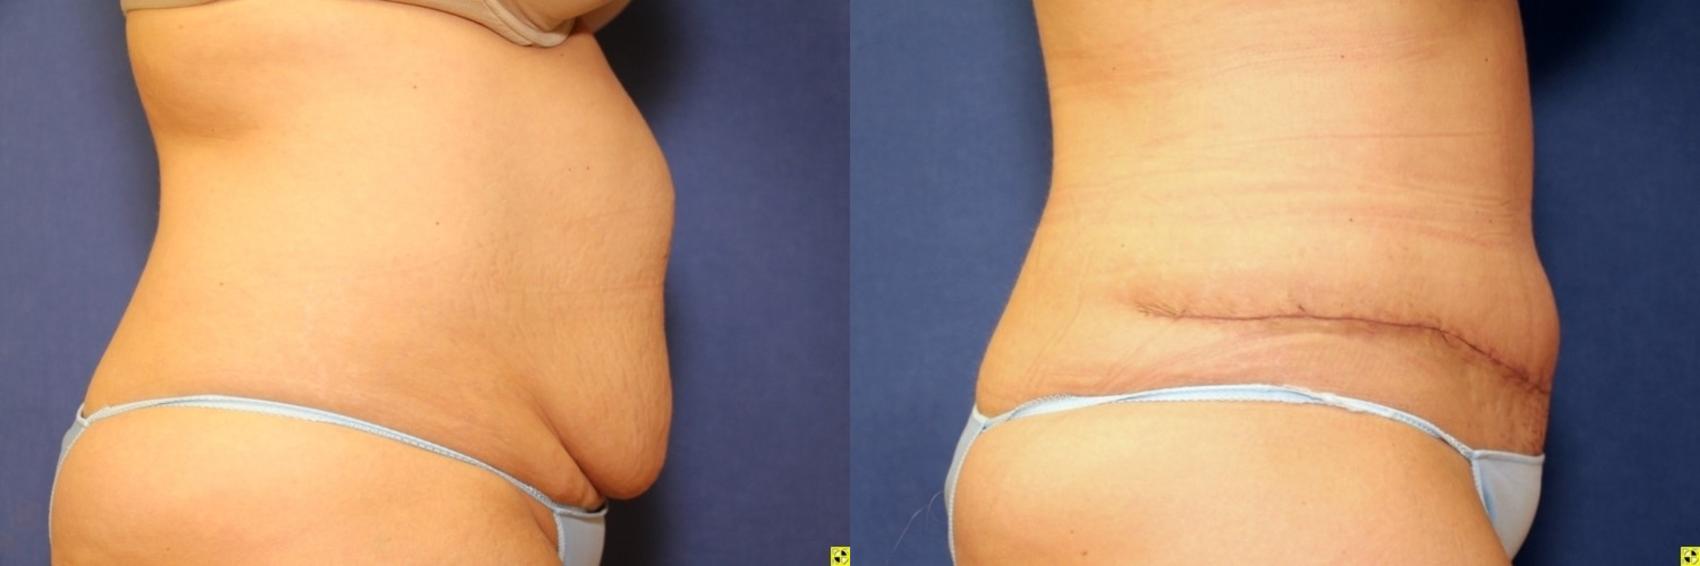 Before & After Tummy Tuck Case 264 Right Side View in Ypsilanti, MI